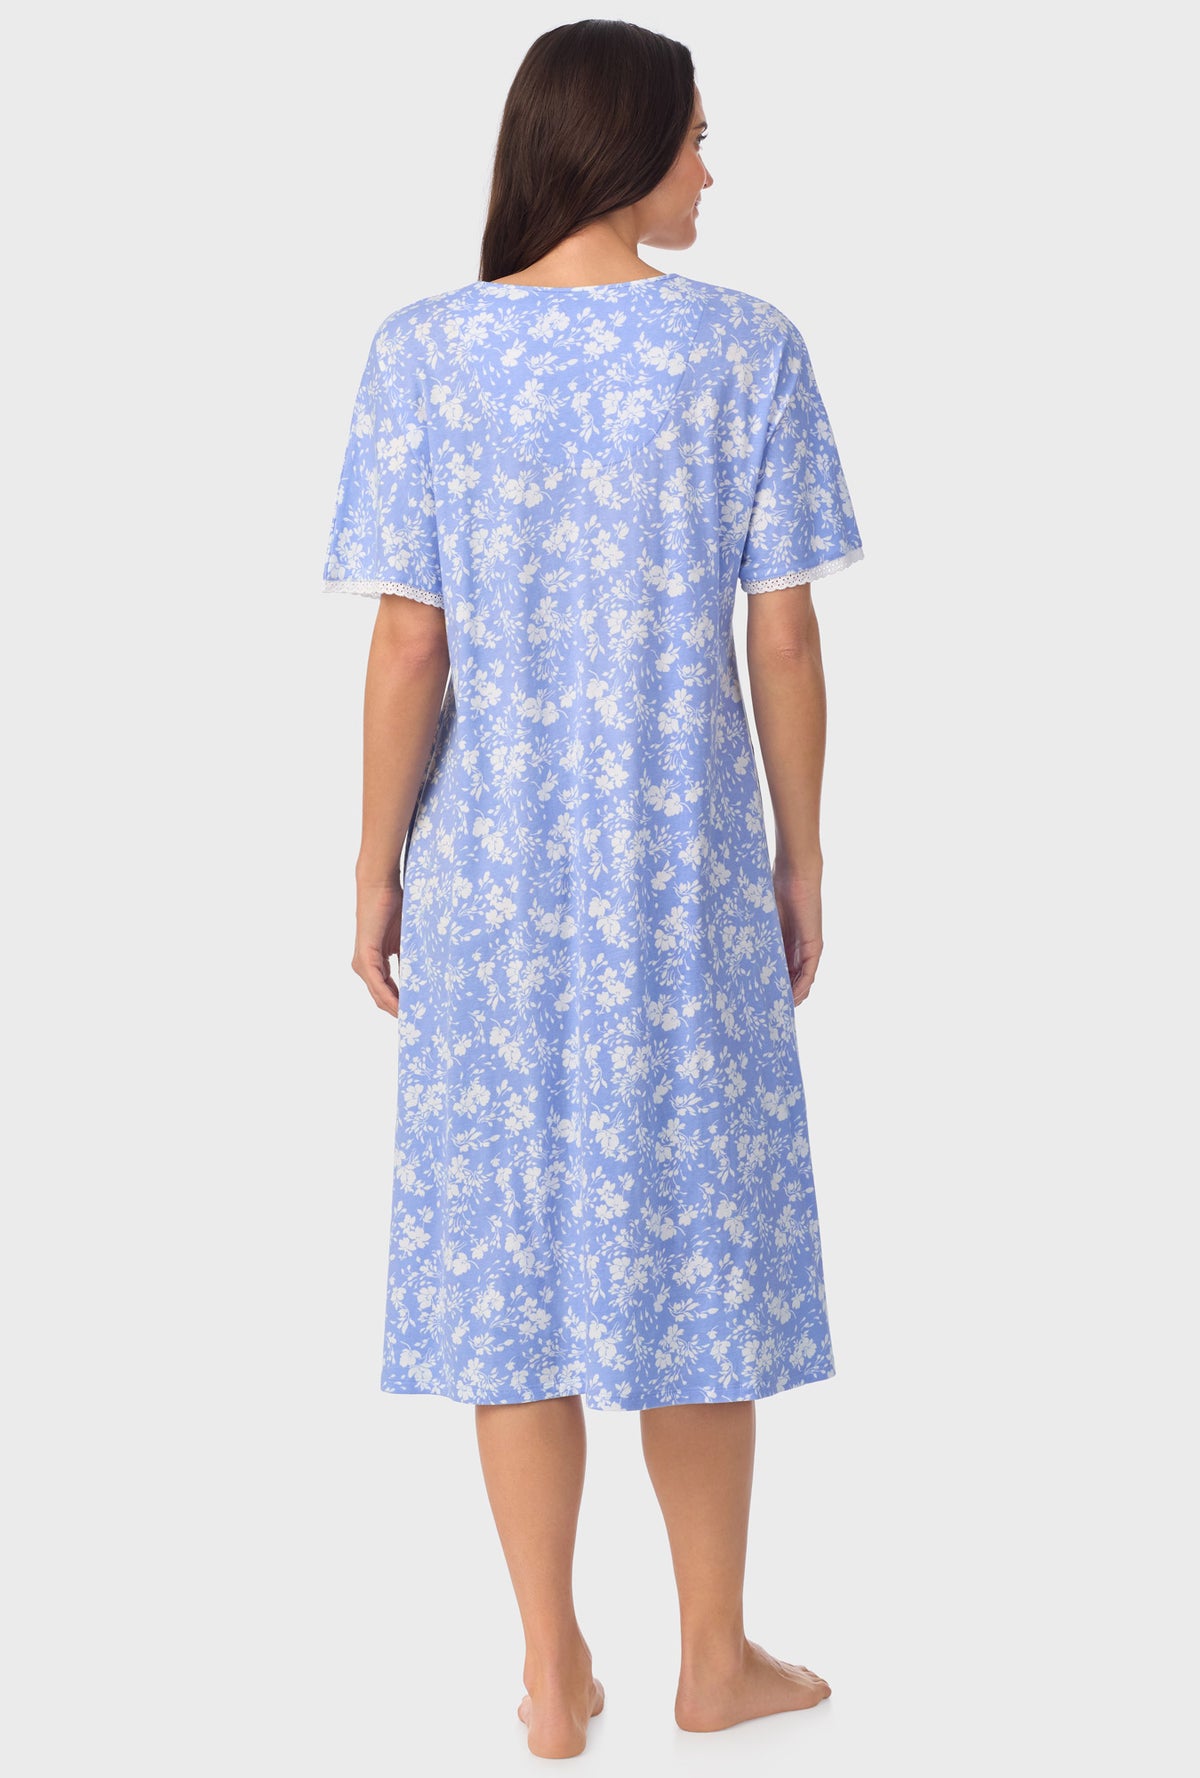 A lady wearing blue Long Sleeve Floral Caftan  with Powder Blue print